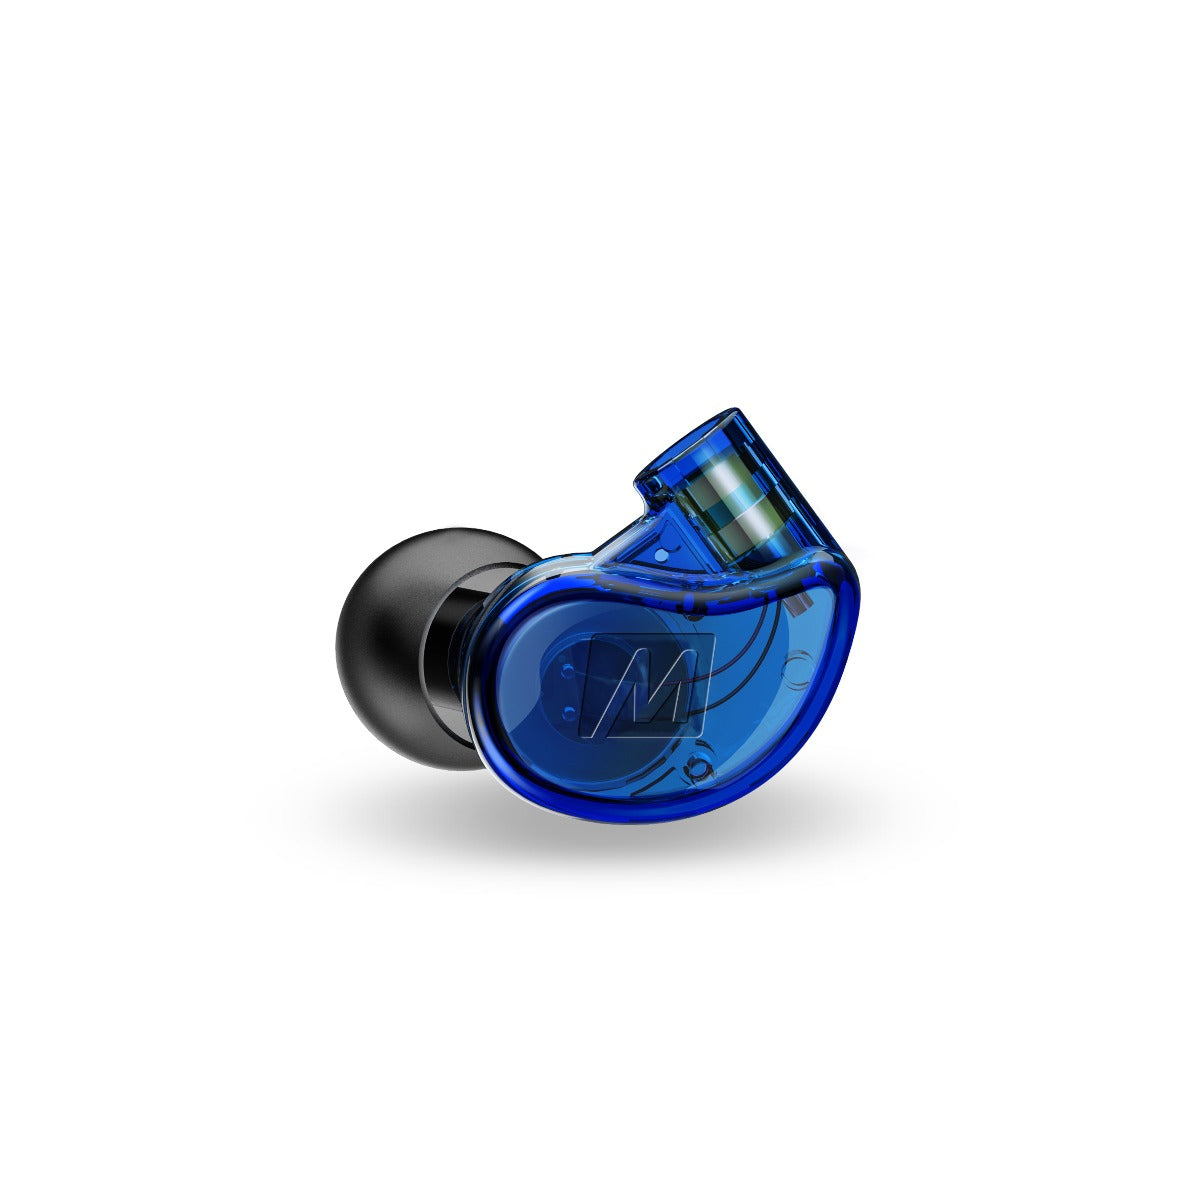 Image of Replacement Earpieces for M6 PRO In-Ear Monitors.